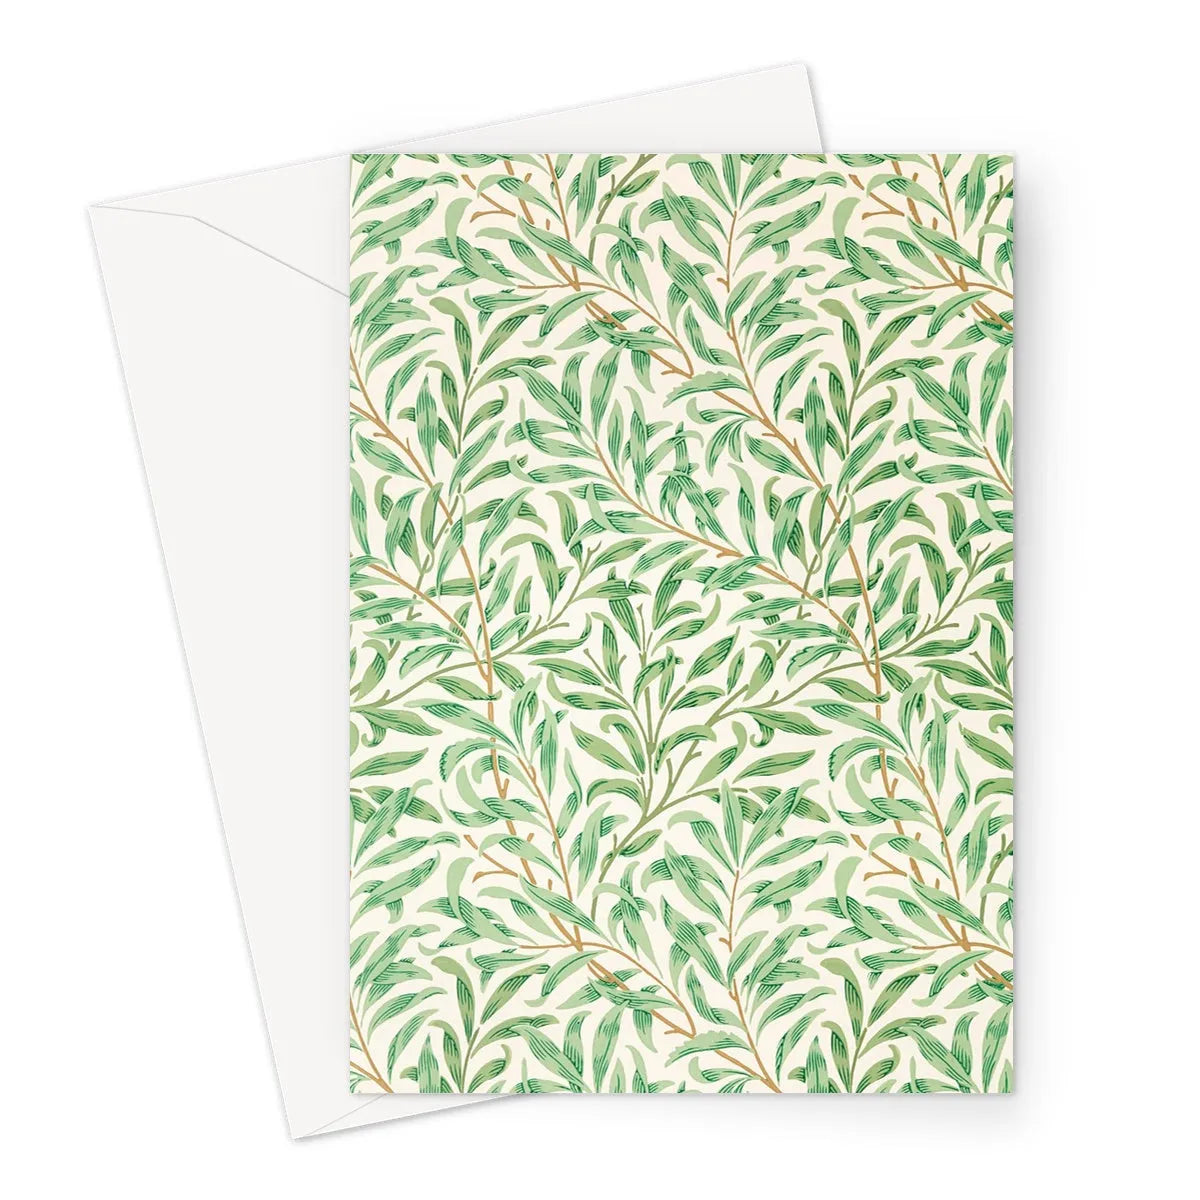 Willow Bough By William Morris Greeting Card - A5 Portrait / 1 Card - Greeting & Note Cards - Aesthetic Art